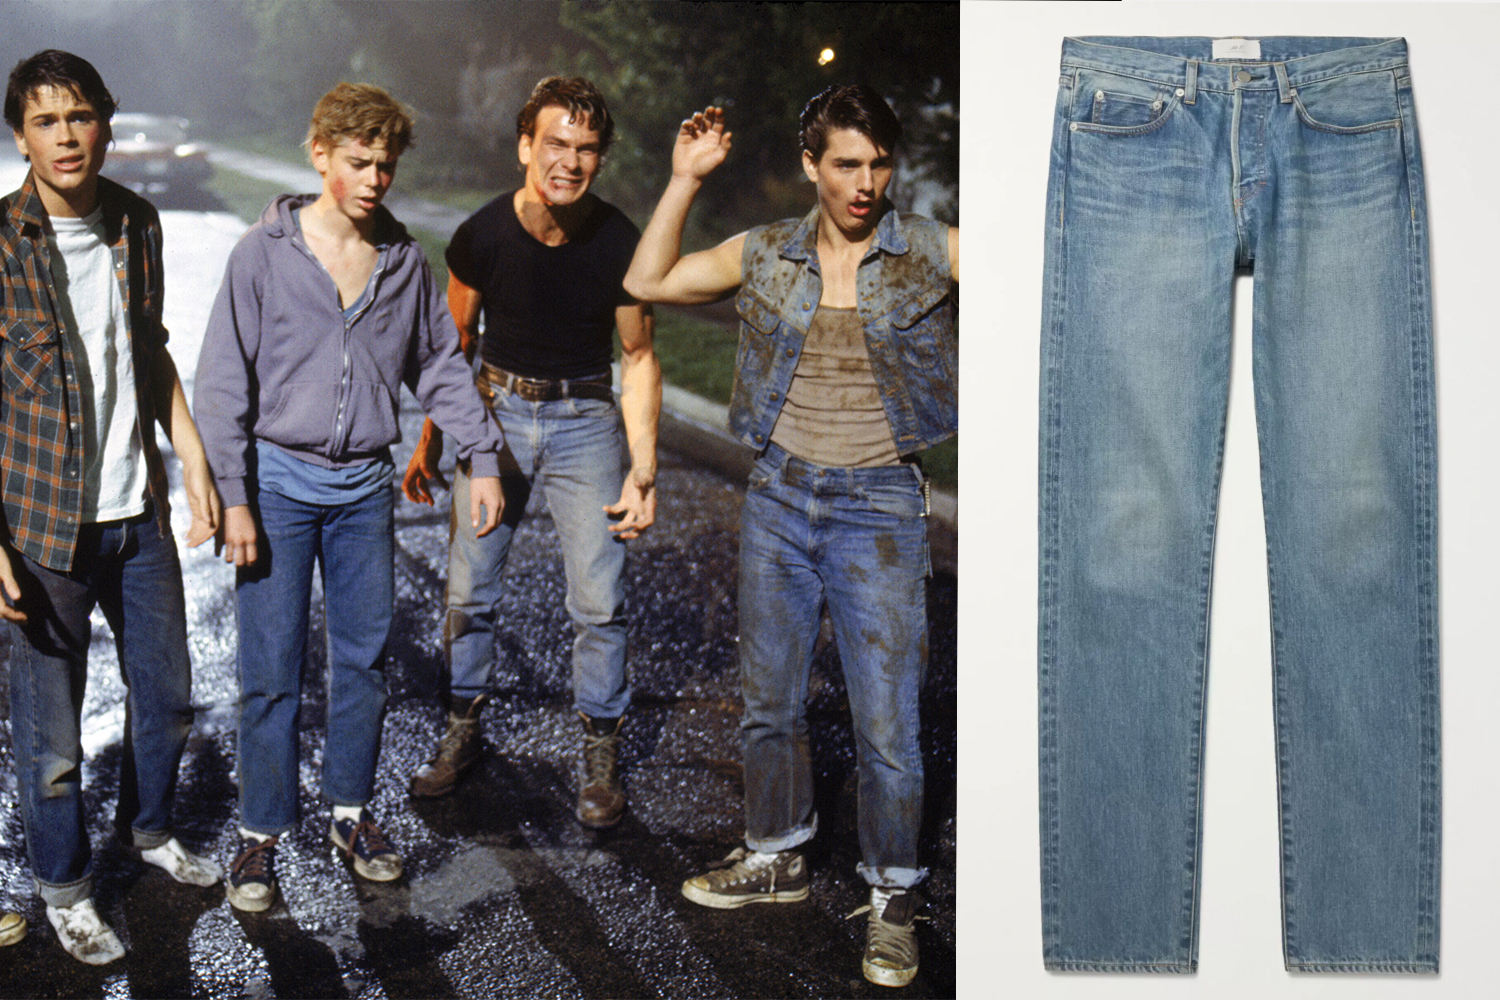 Rob Lowe, Thomas C. Howell, Patrick Swayze, and Tom Cruise on the set of The Outsiders